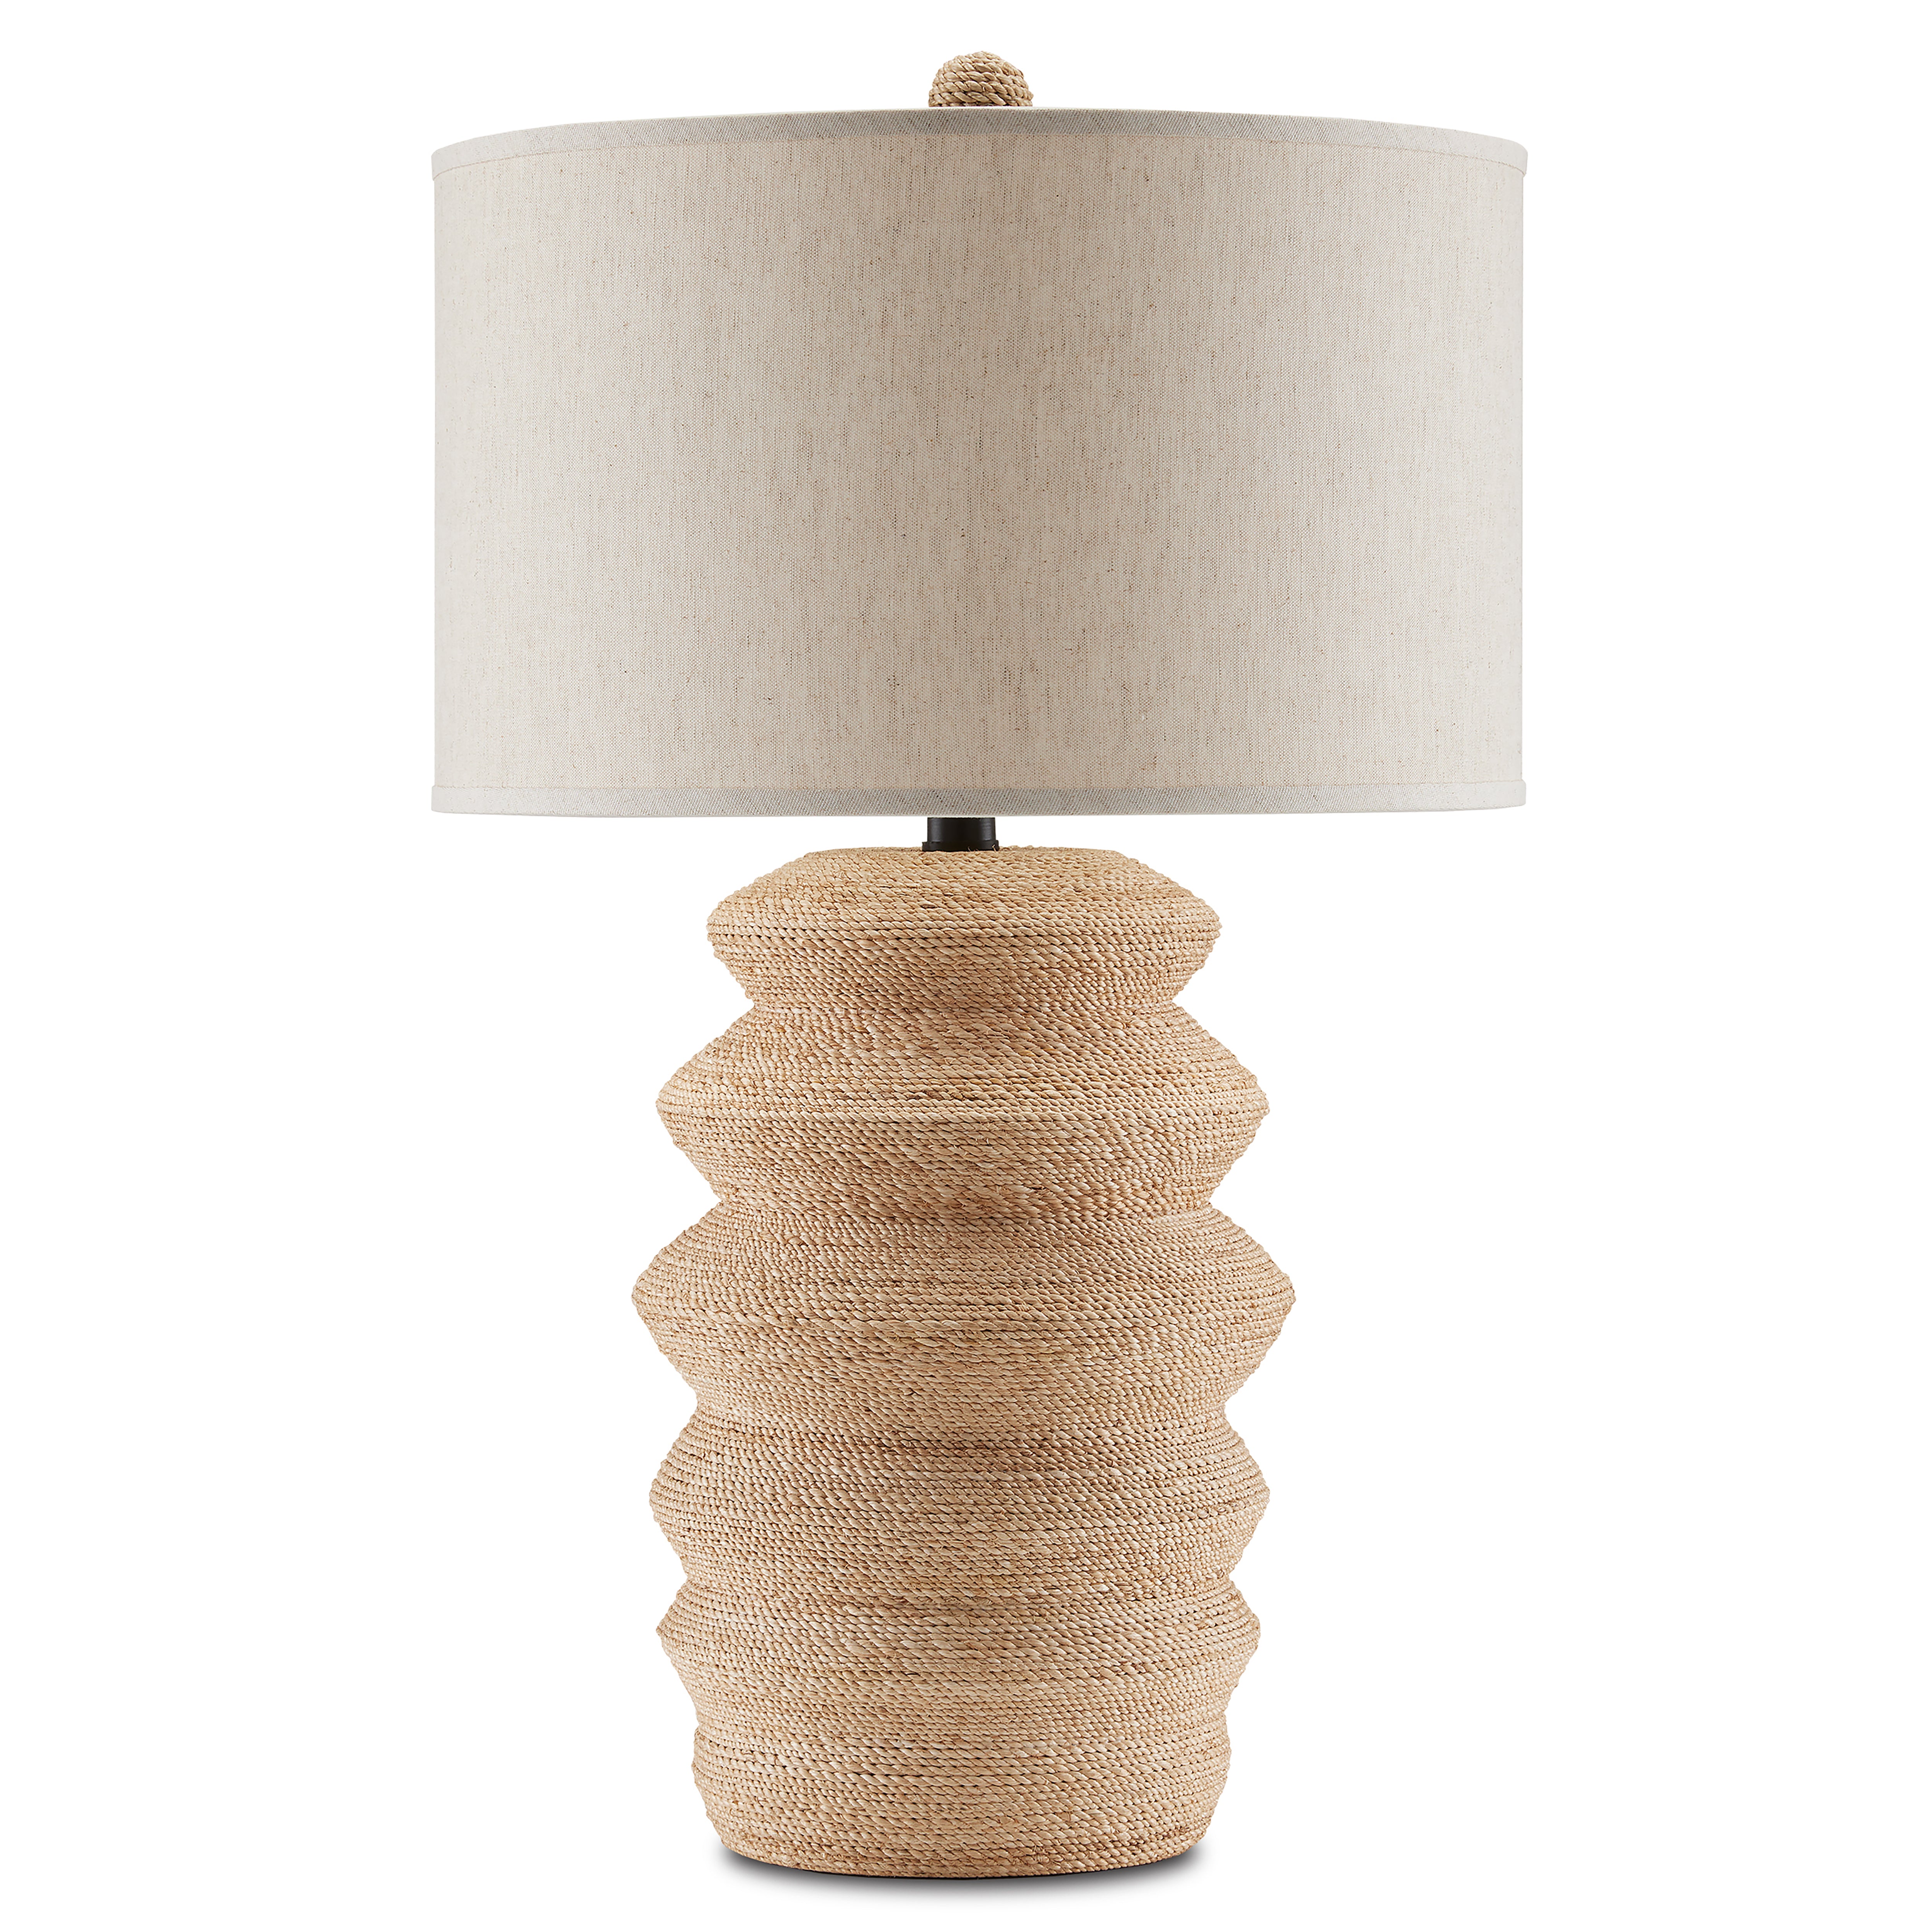 Image of Kavala Table Lamp